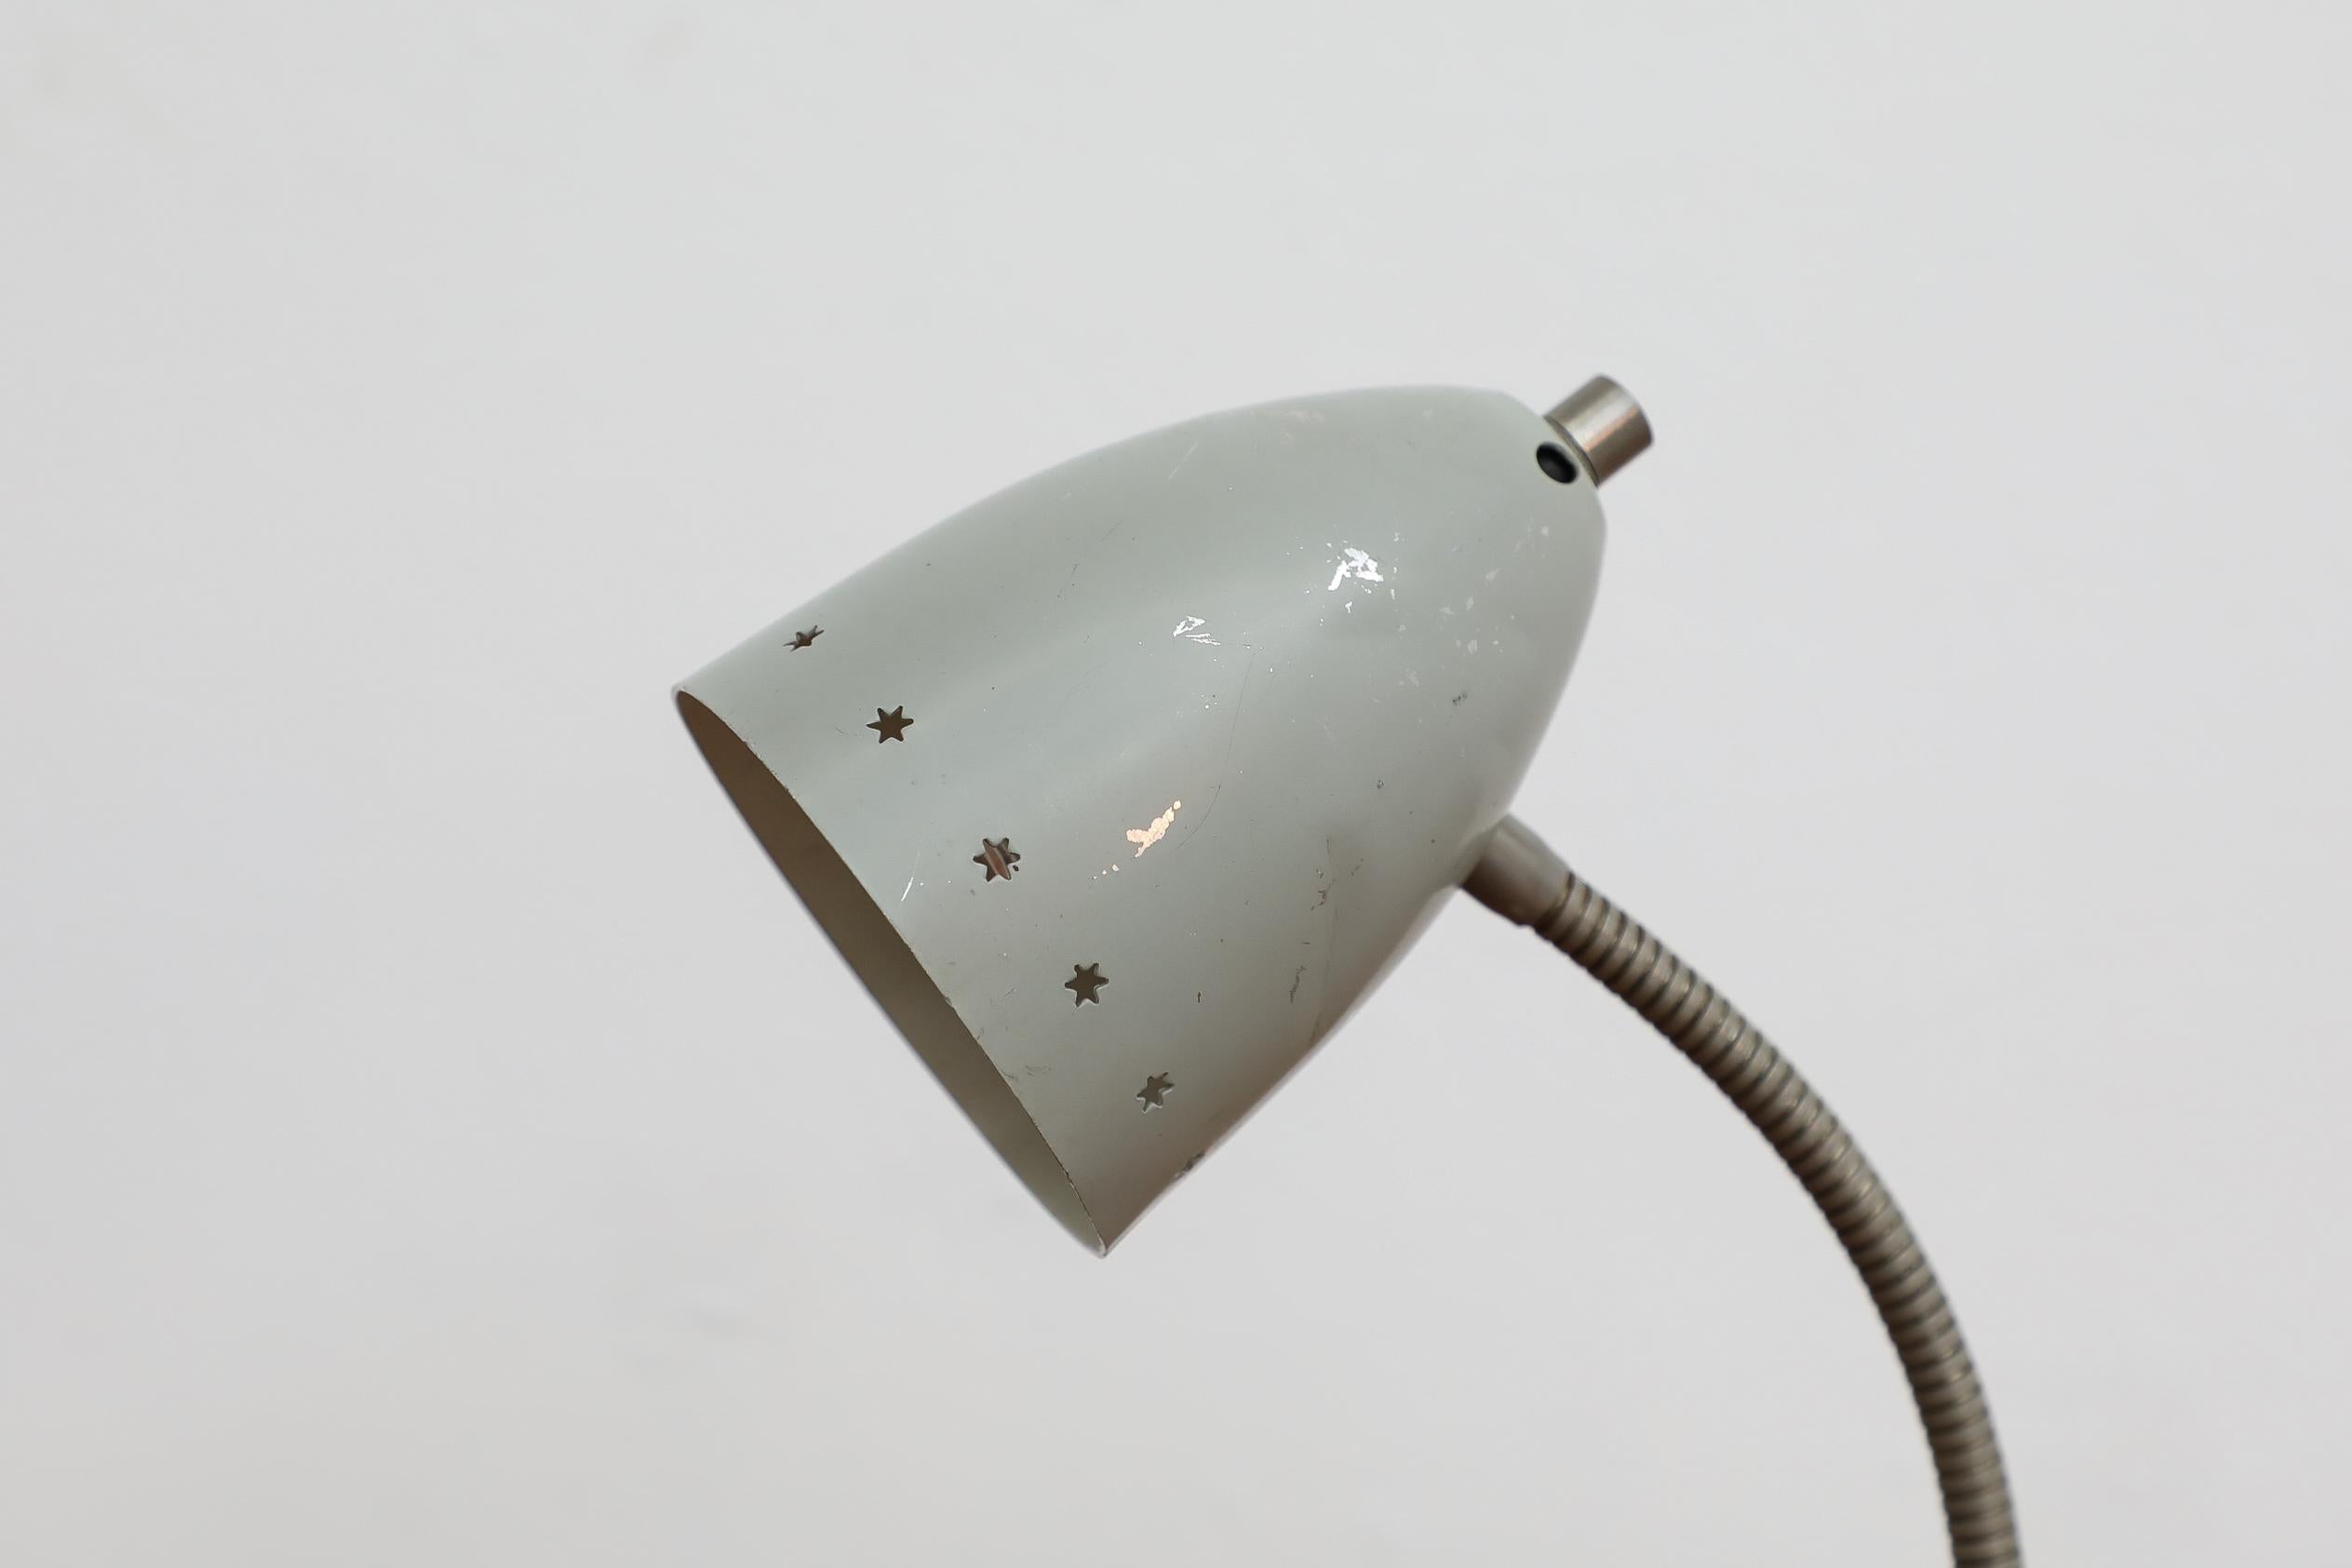 Little Grey Mid-Century Hala Zeist Reading Lamp with Star Cut-outs on Shade For Sale 3